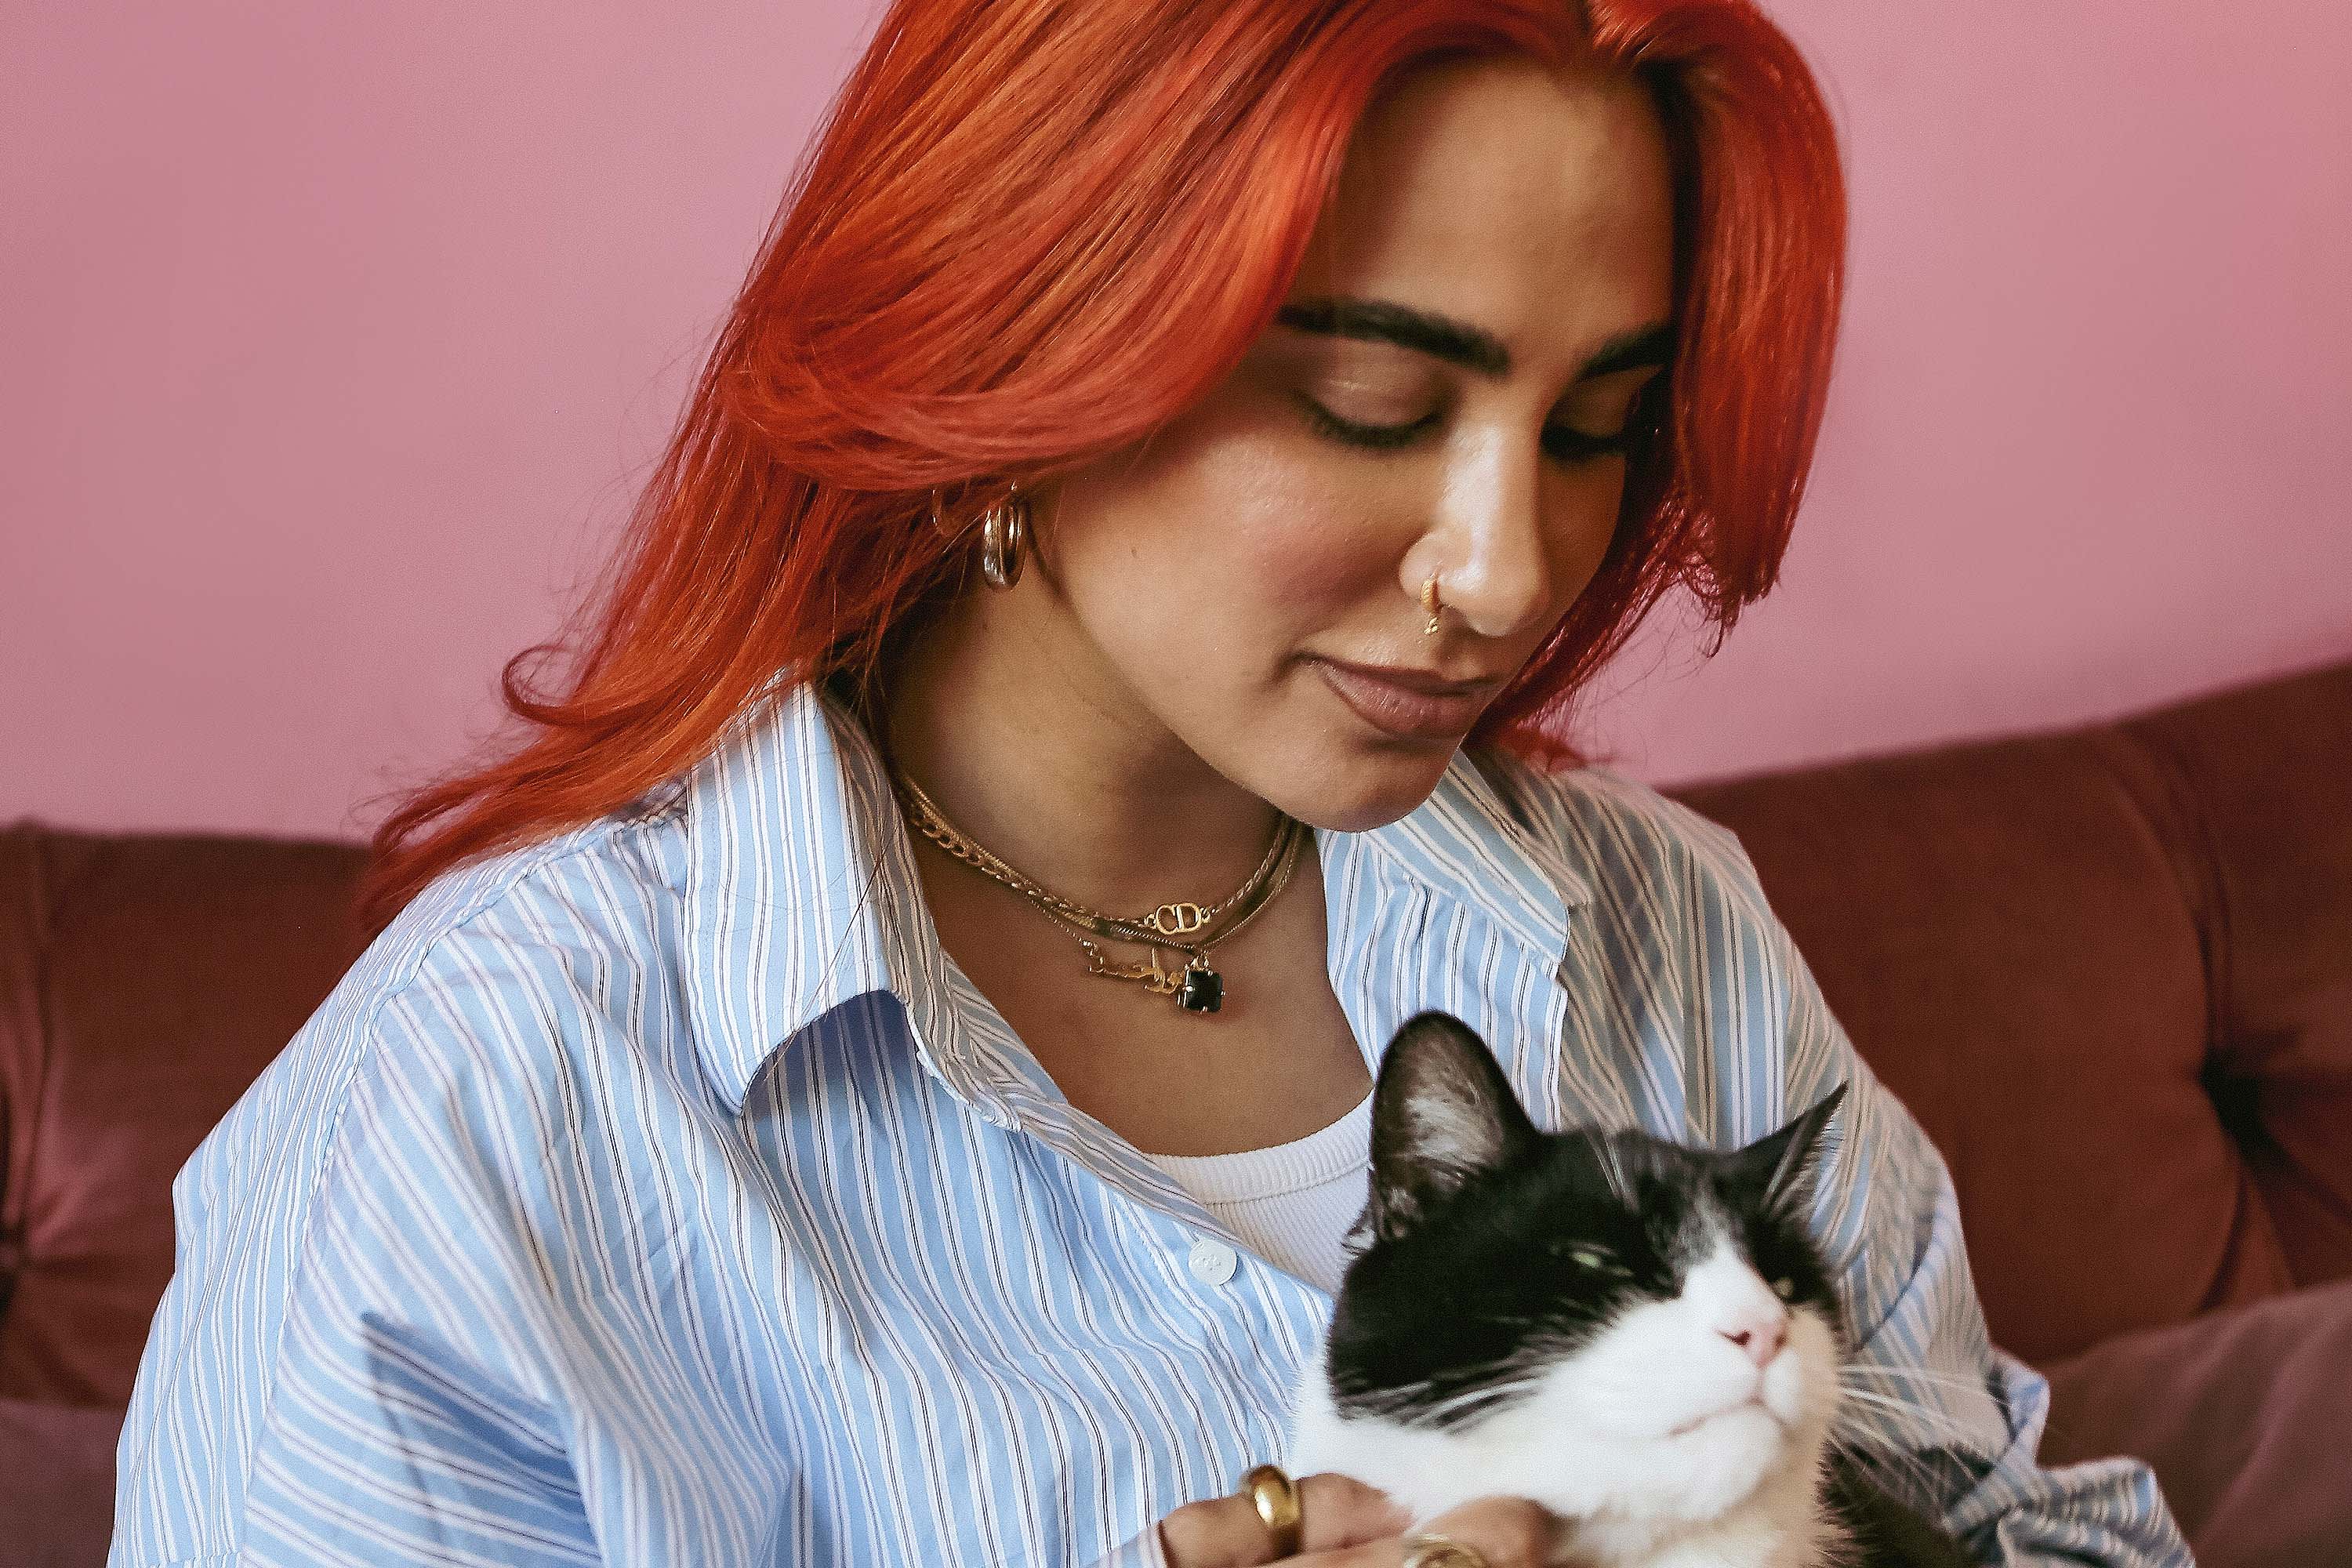 Pxssy Palace’s Nadine Noor talks self-care, community and party anthems